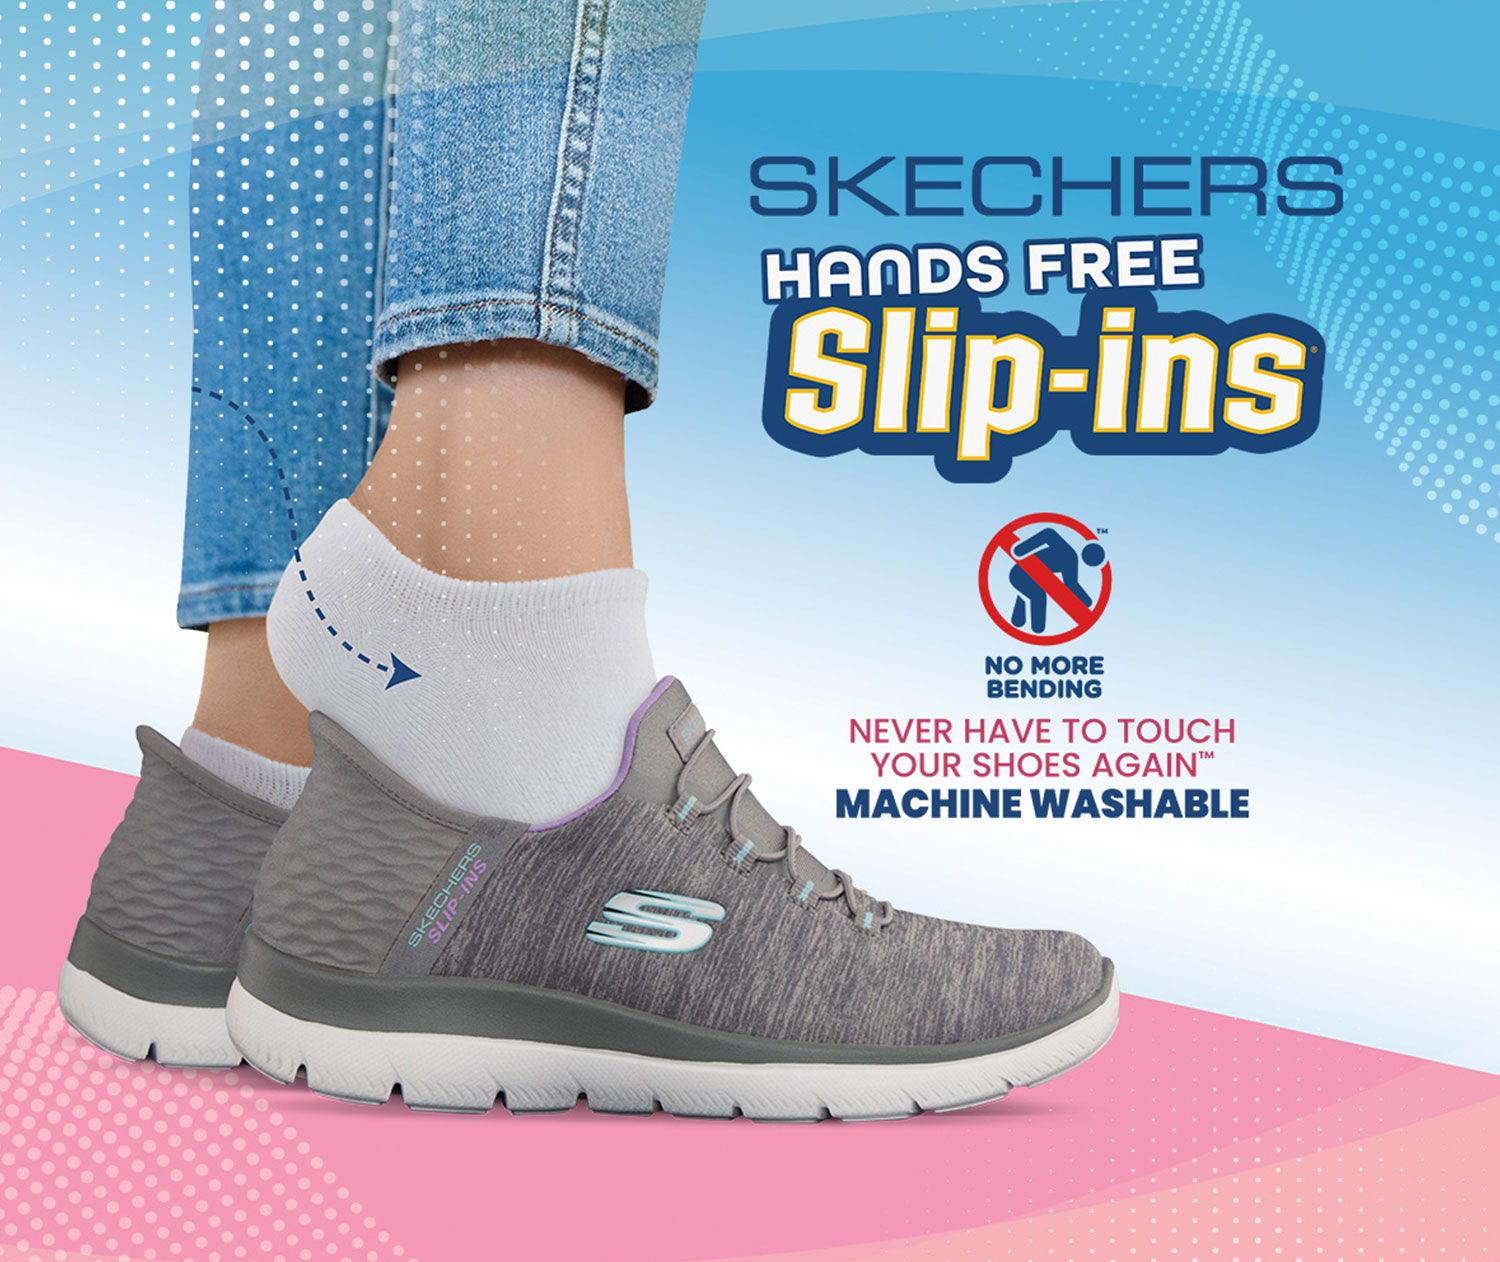 You Need To See These New Skechers Shoes For Women-saigonsouth.com.vn